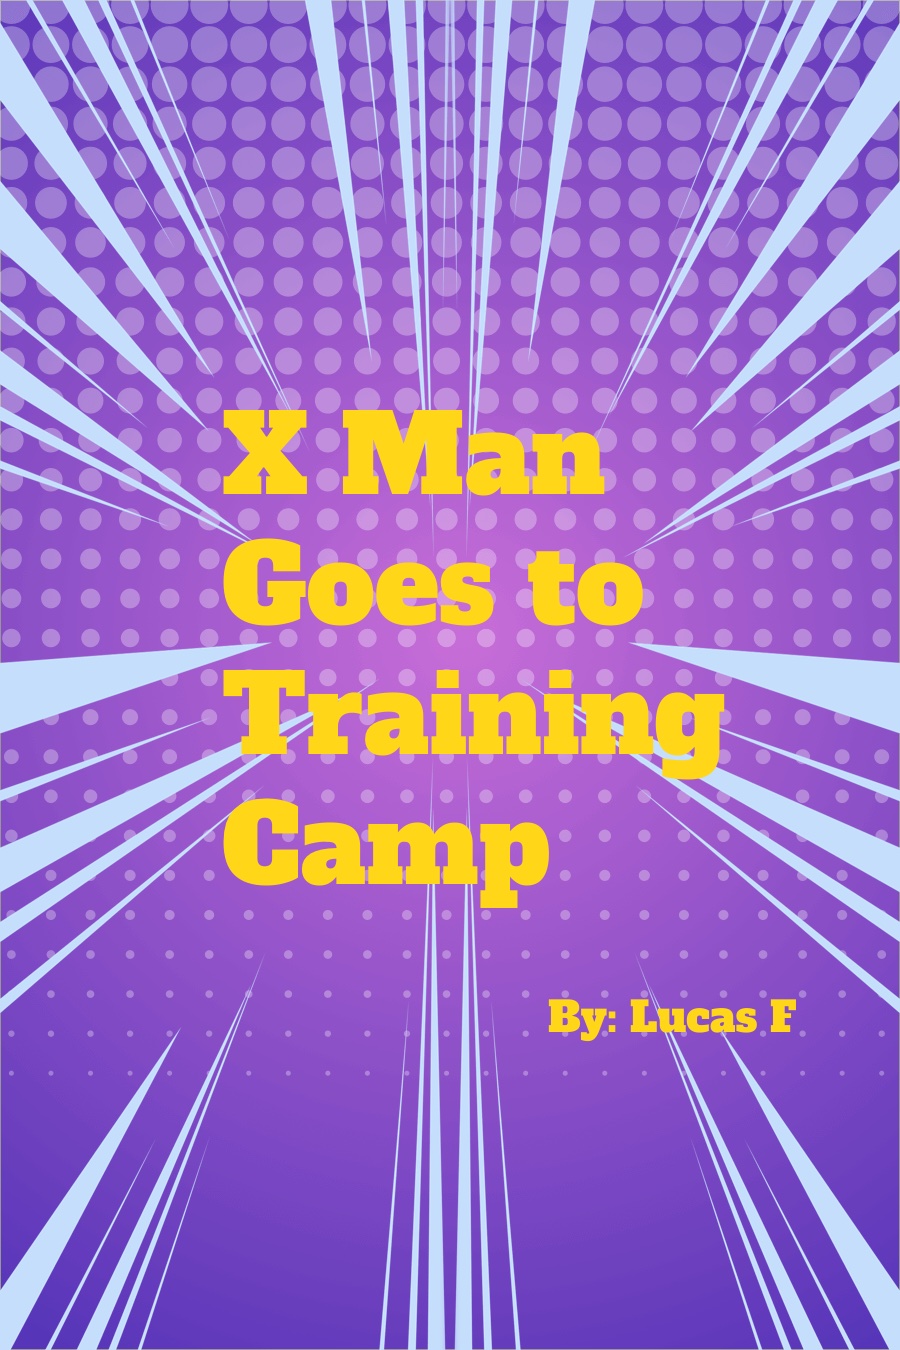 X-Man Goes to Training Camp by Lucas F